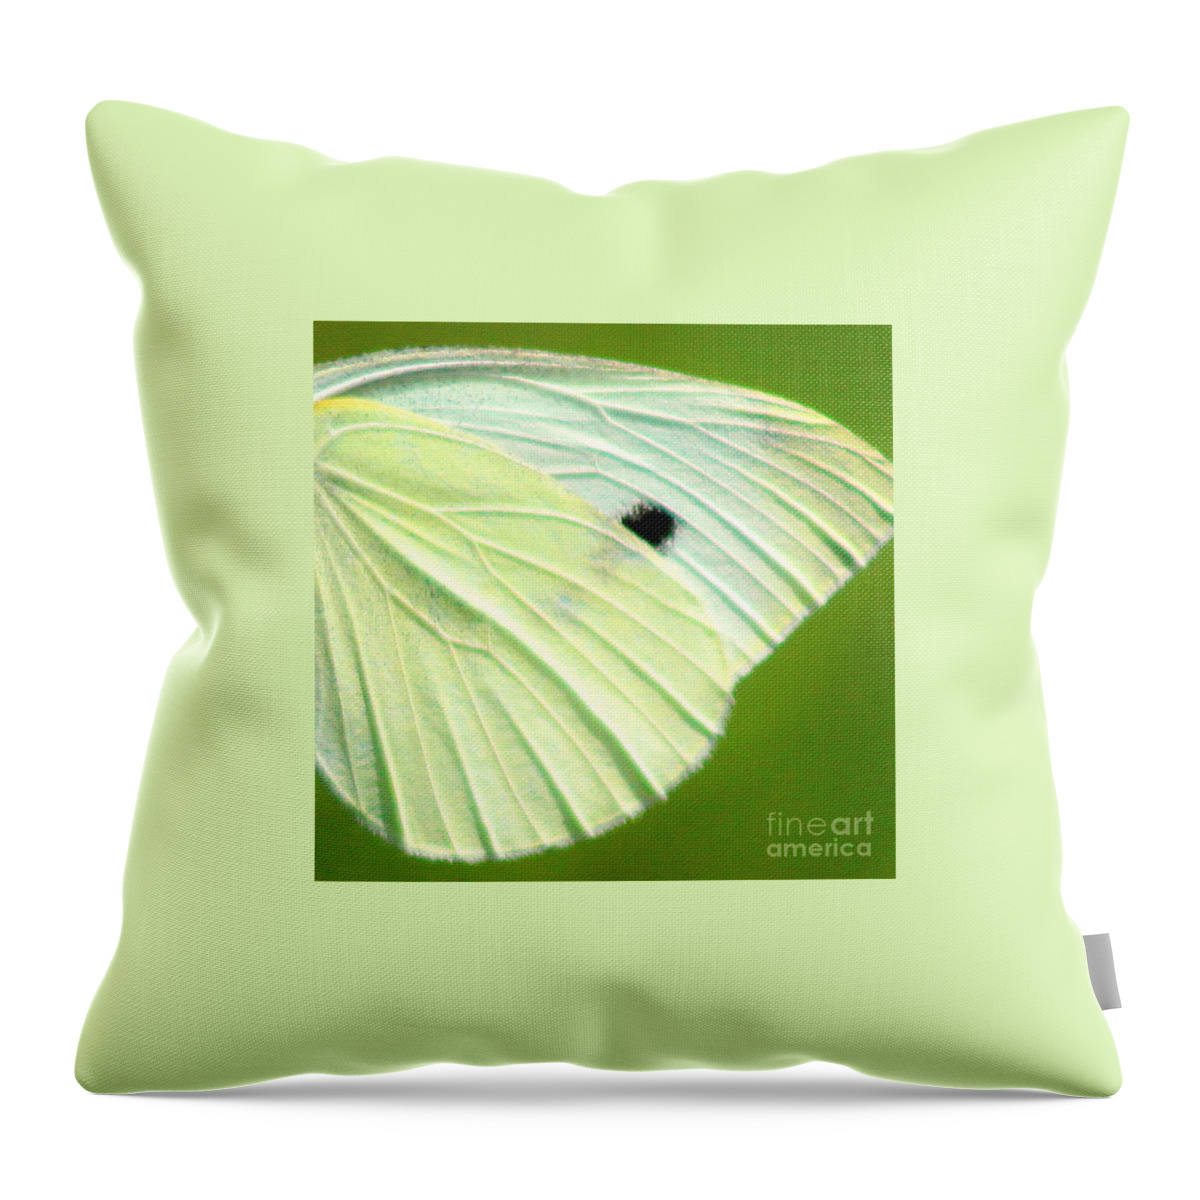 Butterfly Throw Pillow featuring the photograph Cabbage White Butterfly Wing Square by Karen Adams